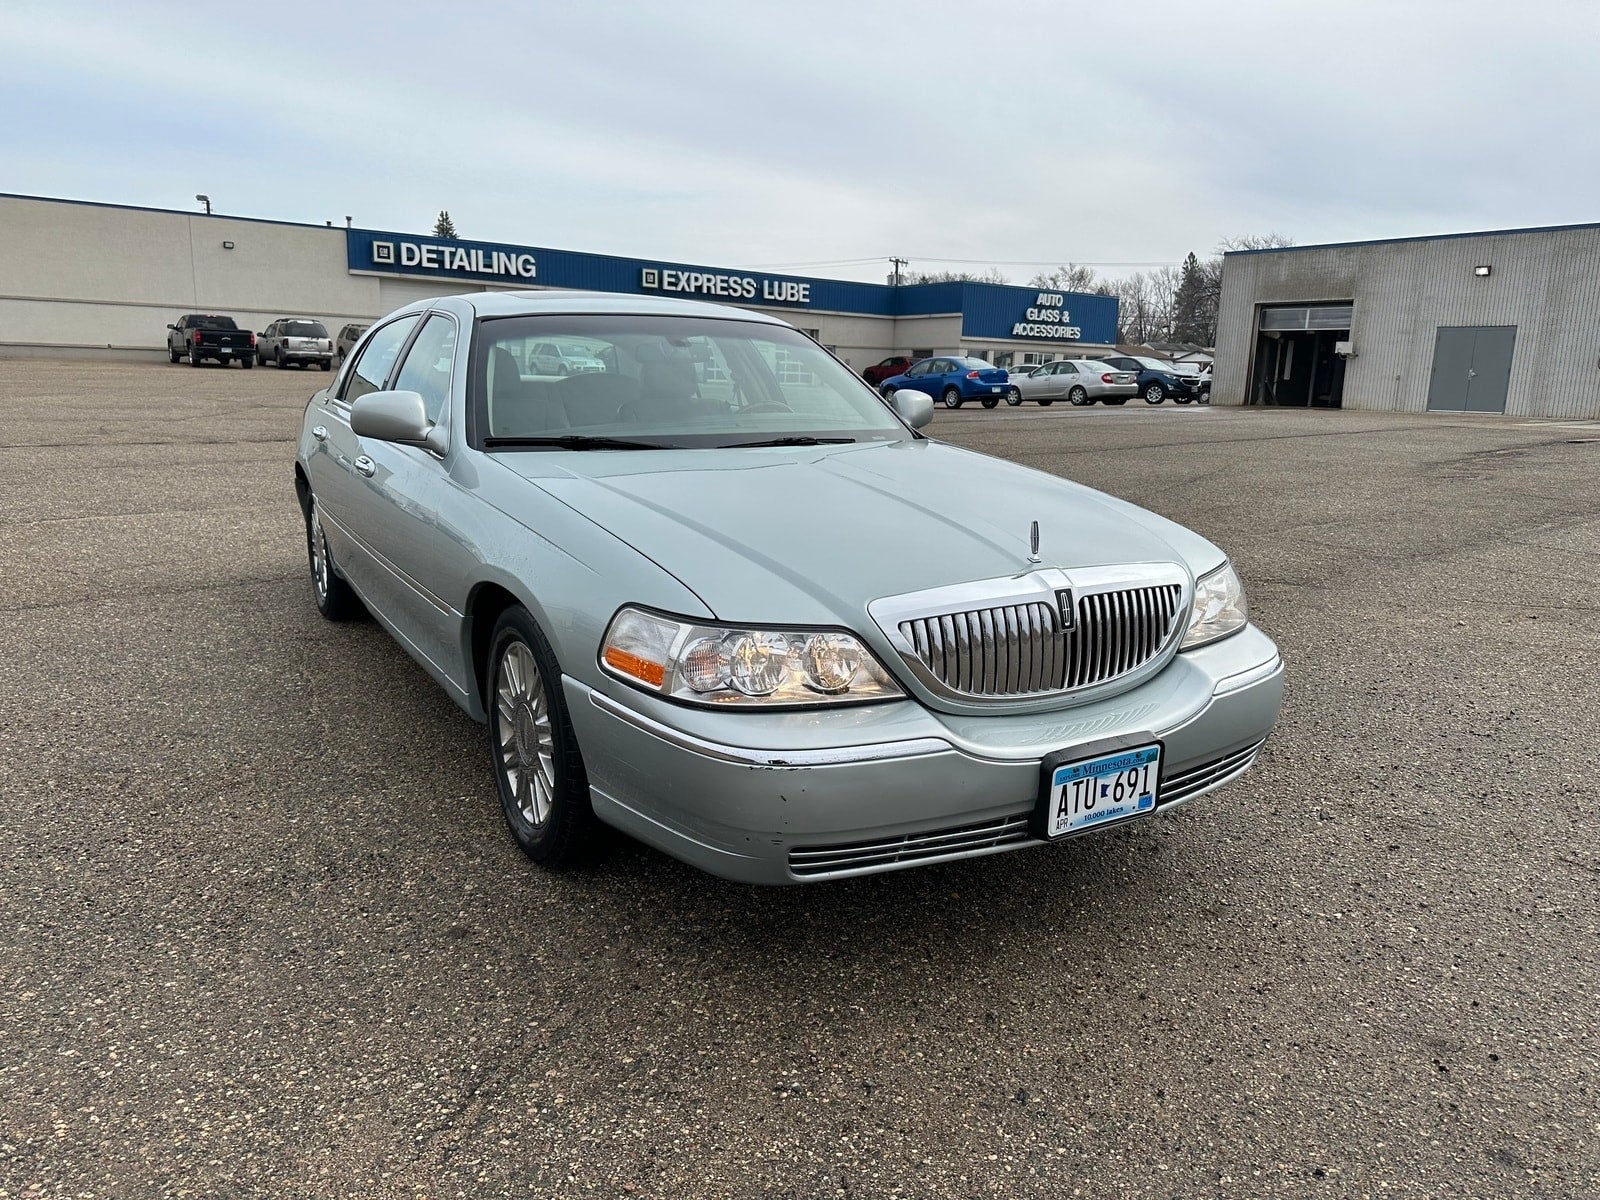 Used 2007 Lincoln Town Car Signature Limited with VIN 1LNHM82W47Y634734 for sale in Fergus Falls, Minnesota